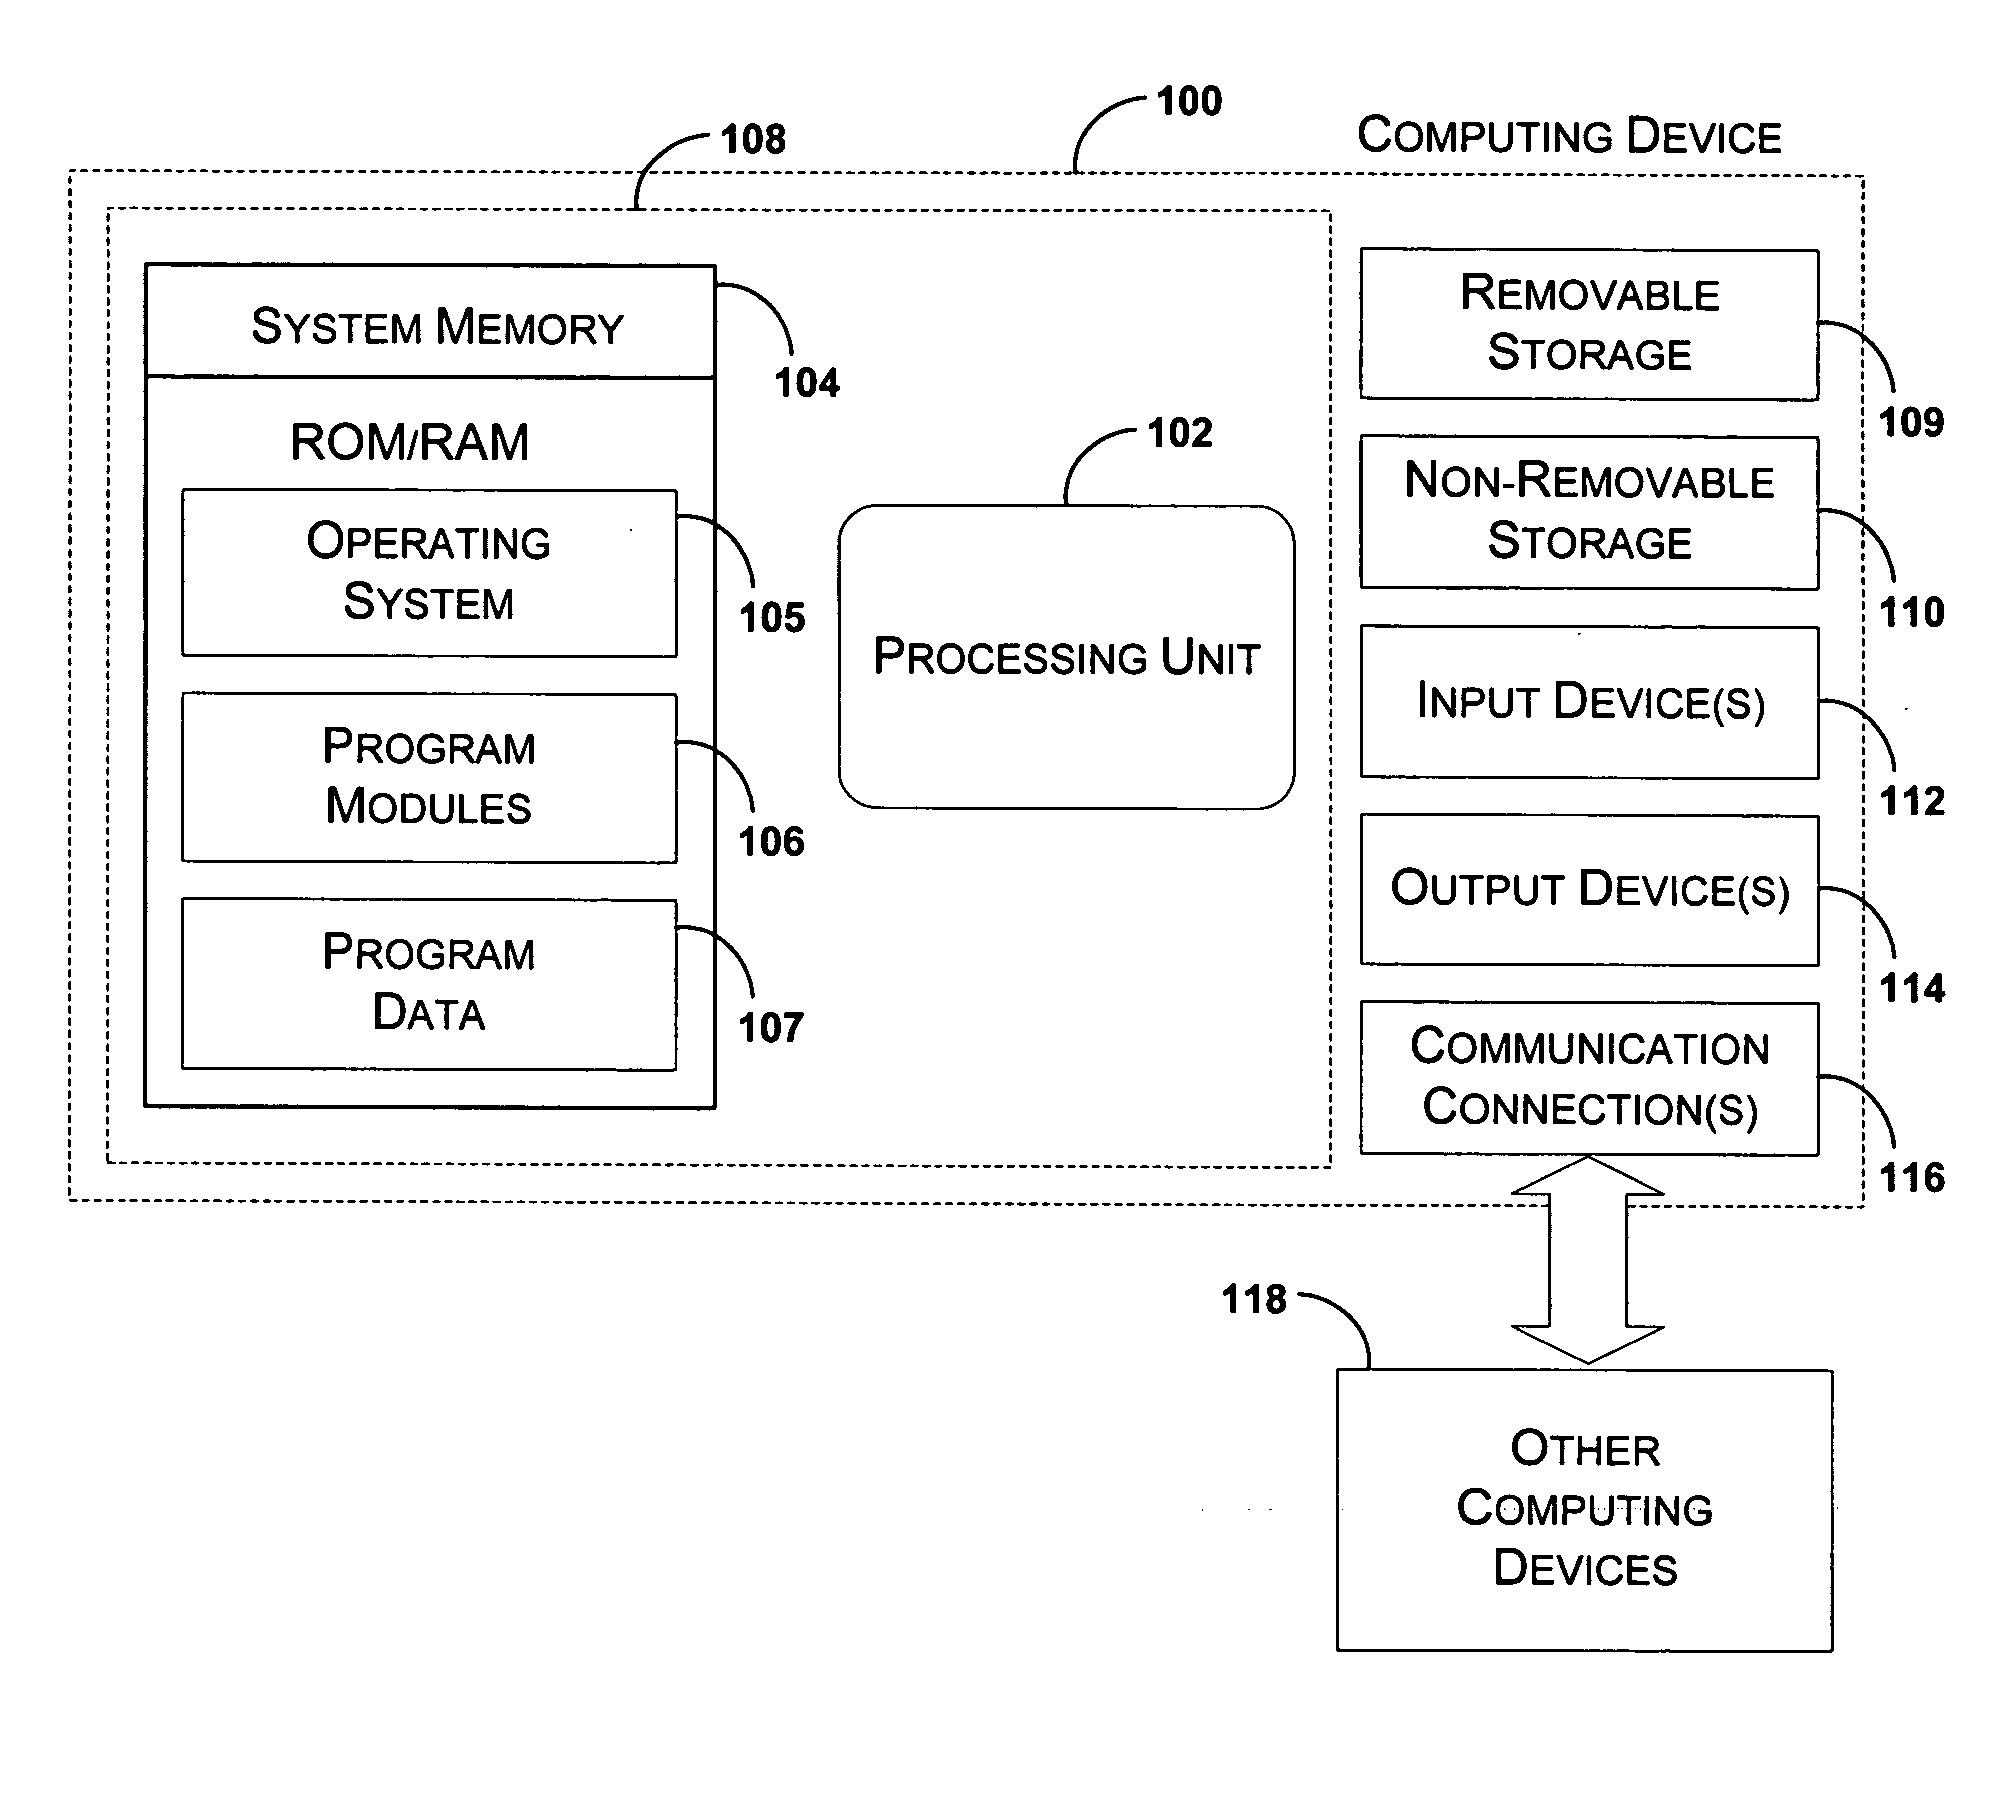 Flexible architecture for notifying applications of state changes